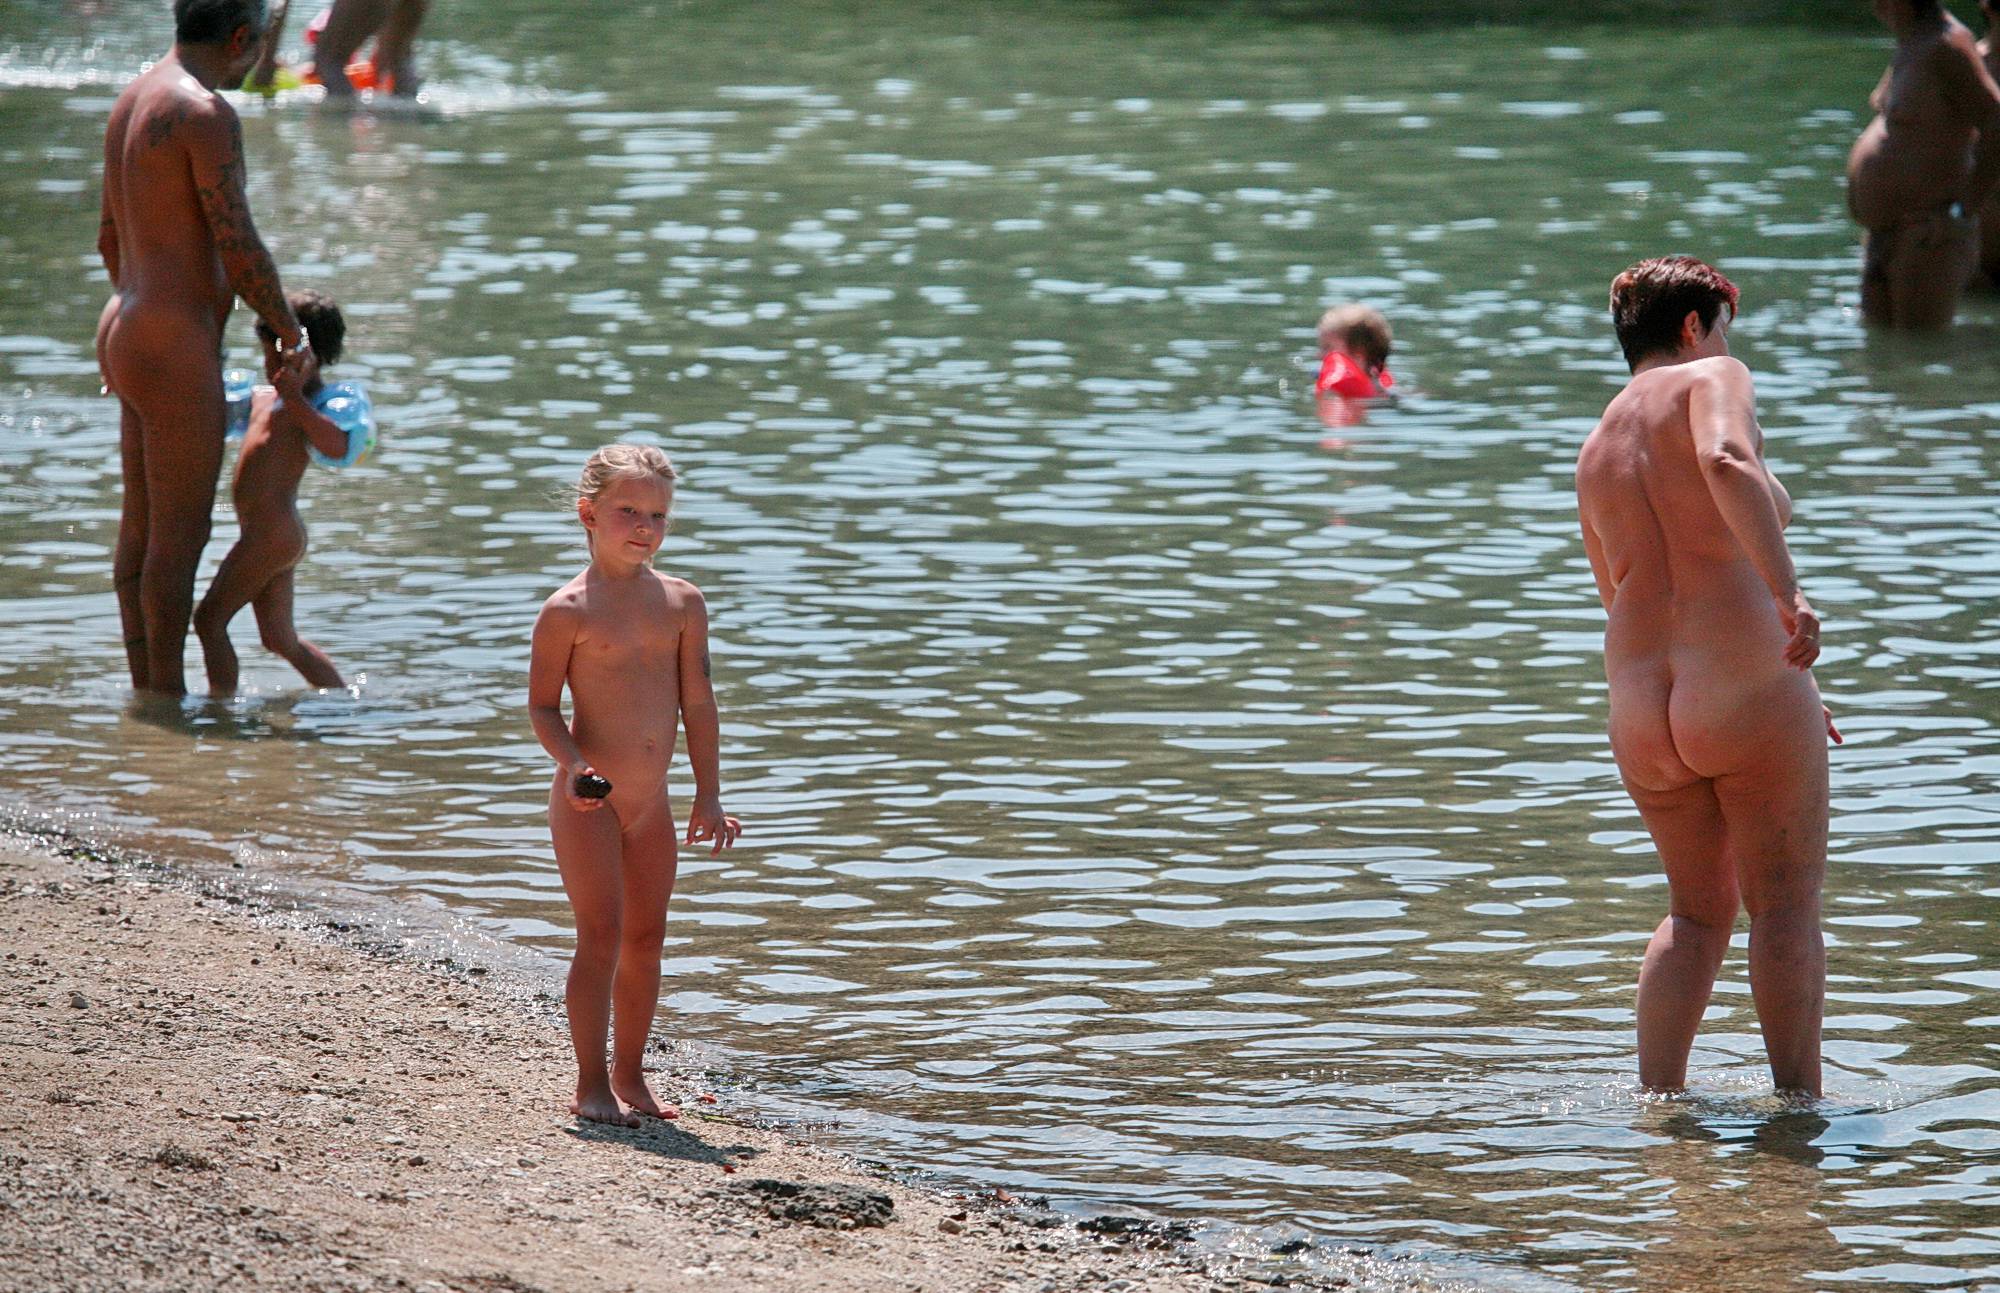 By the Water Shore Play - 2